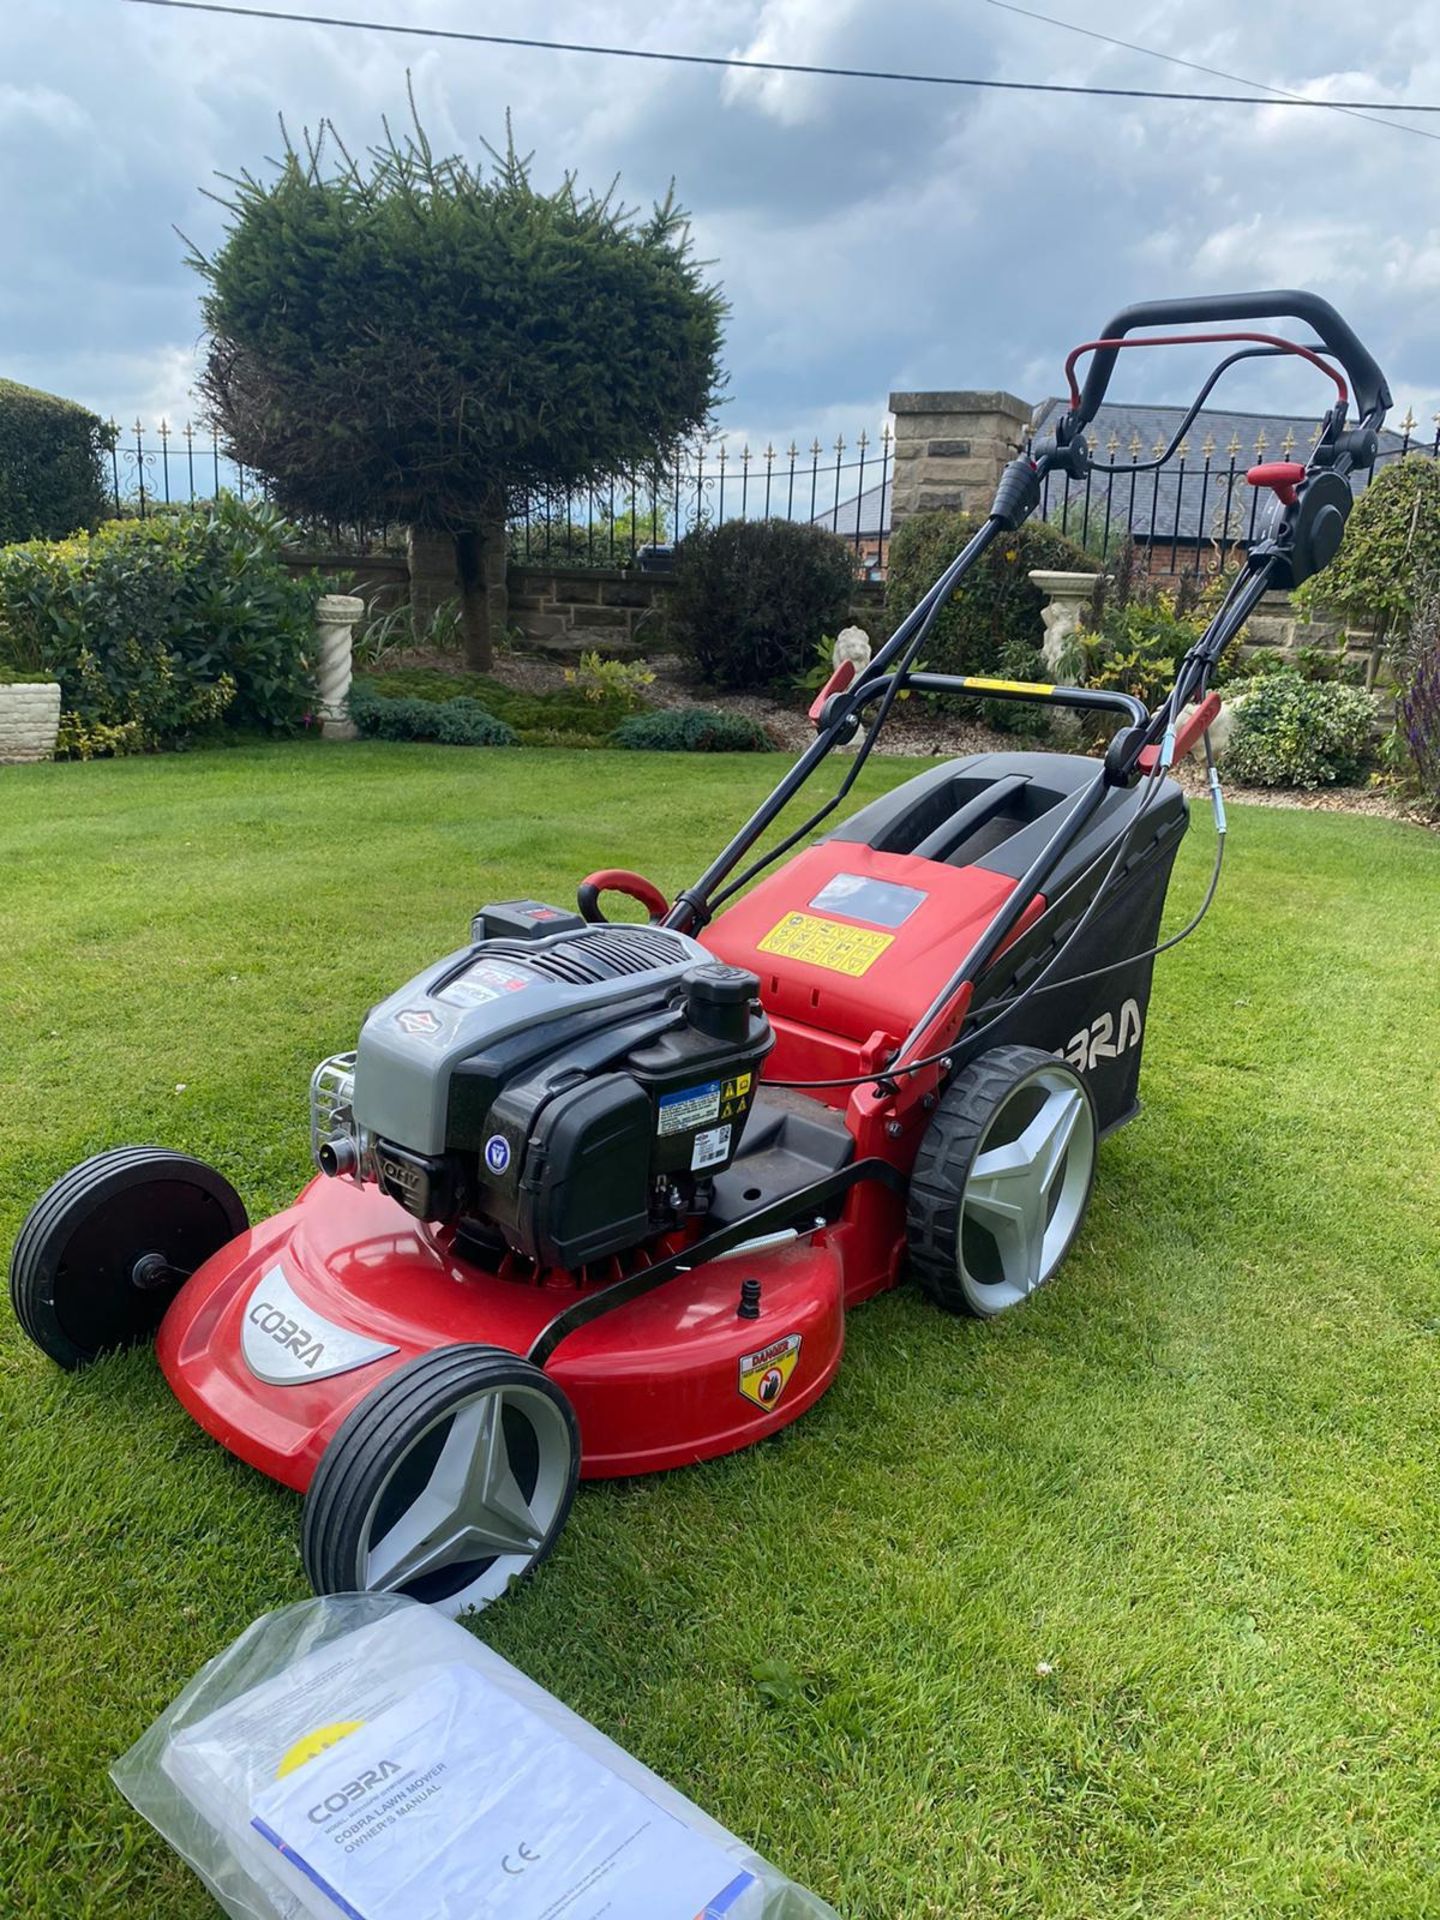 NEW AND UNUSED COBRA MX515SPBI LAWN MOWER, ELECTRIC START, 20" DECK, MANUAL INCLUDED *NO VAT* - Image 3 of 6